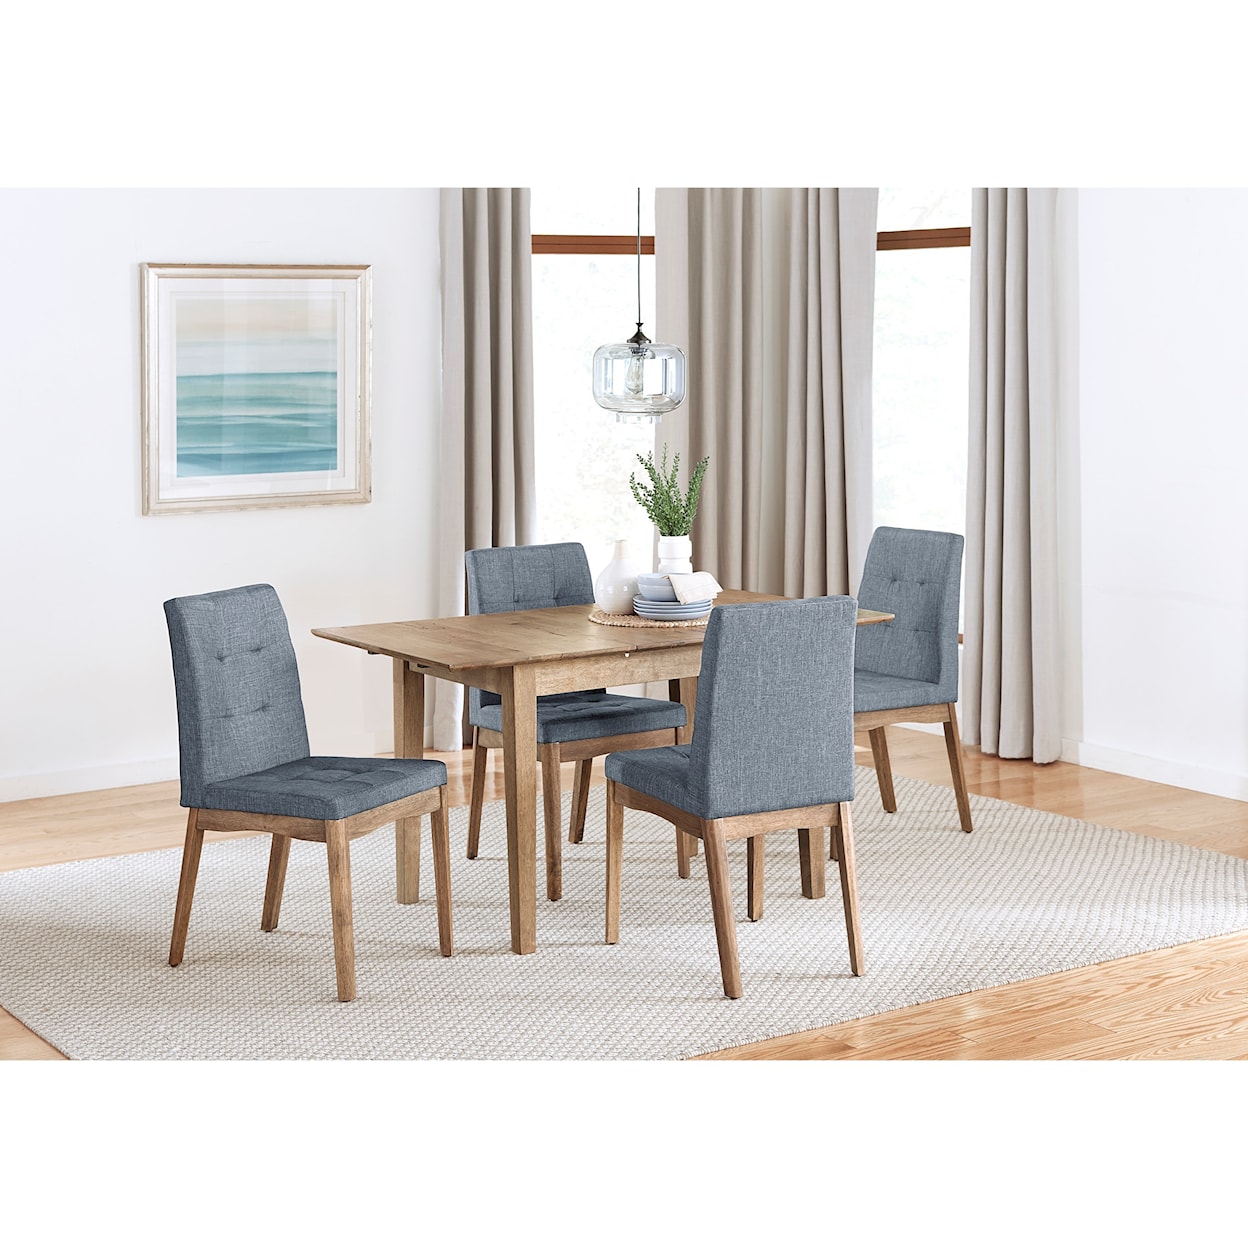 Carolina Chairs Barcelona 5-Piece Butterfly Dining Table Set